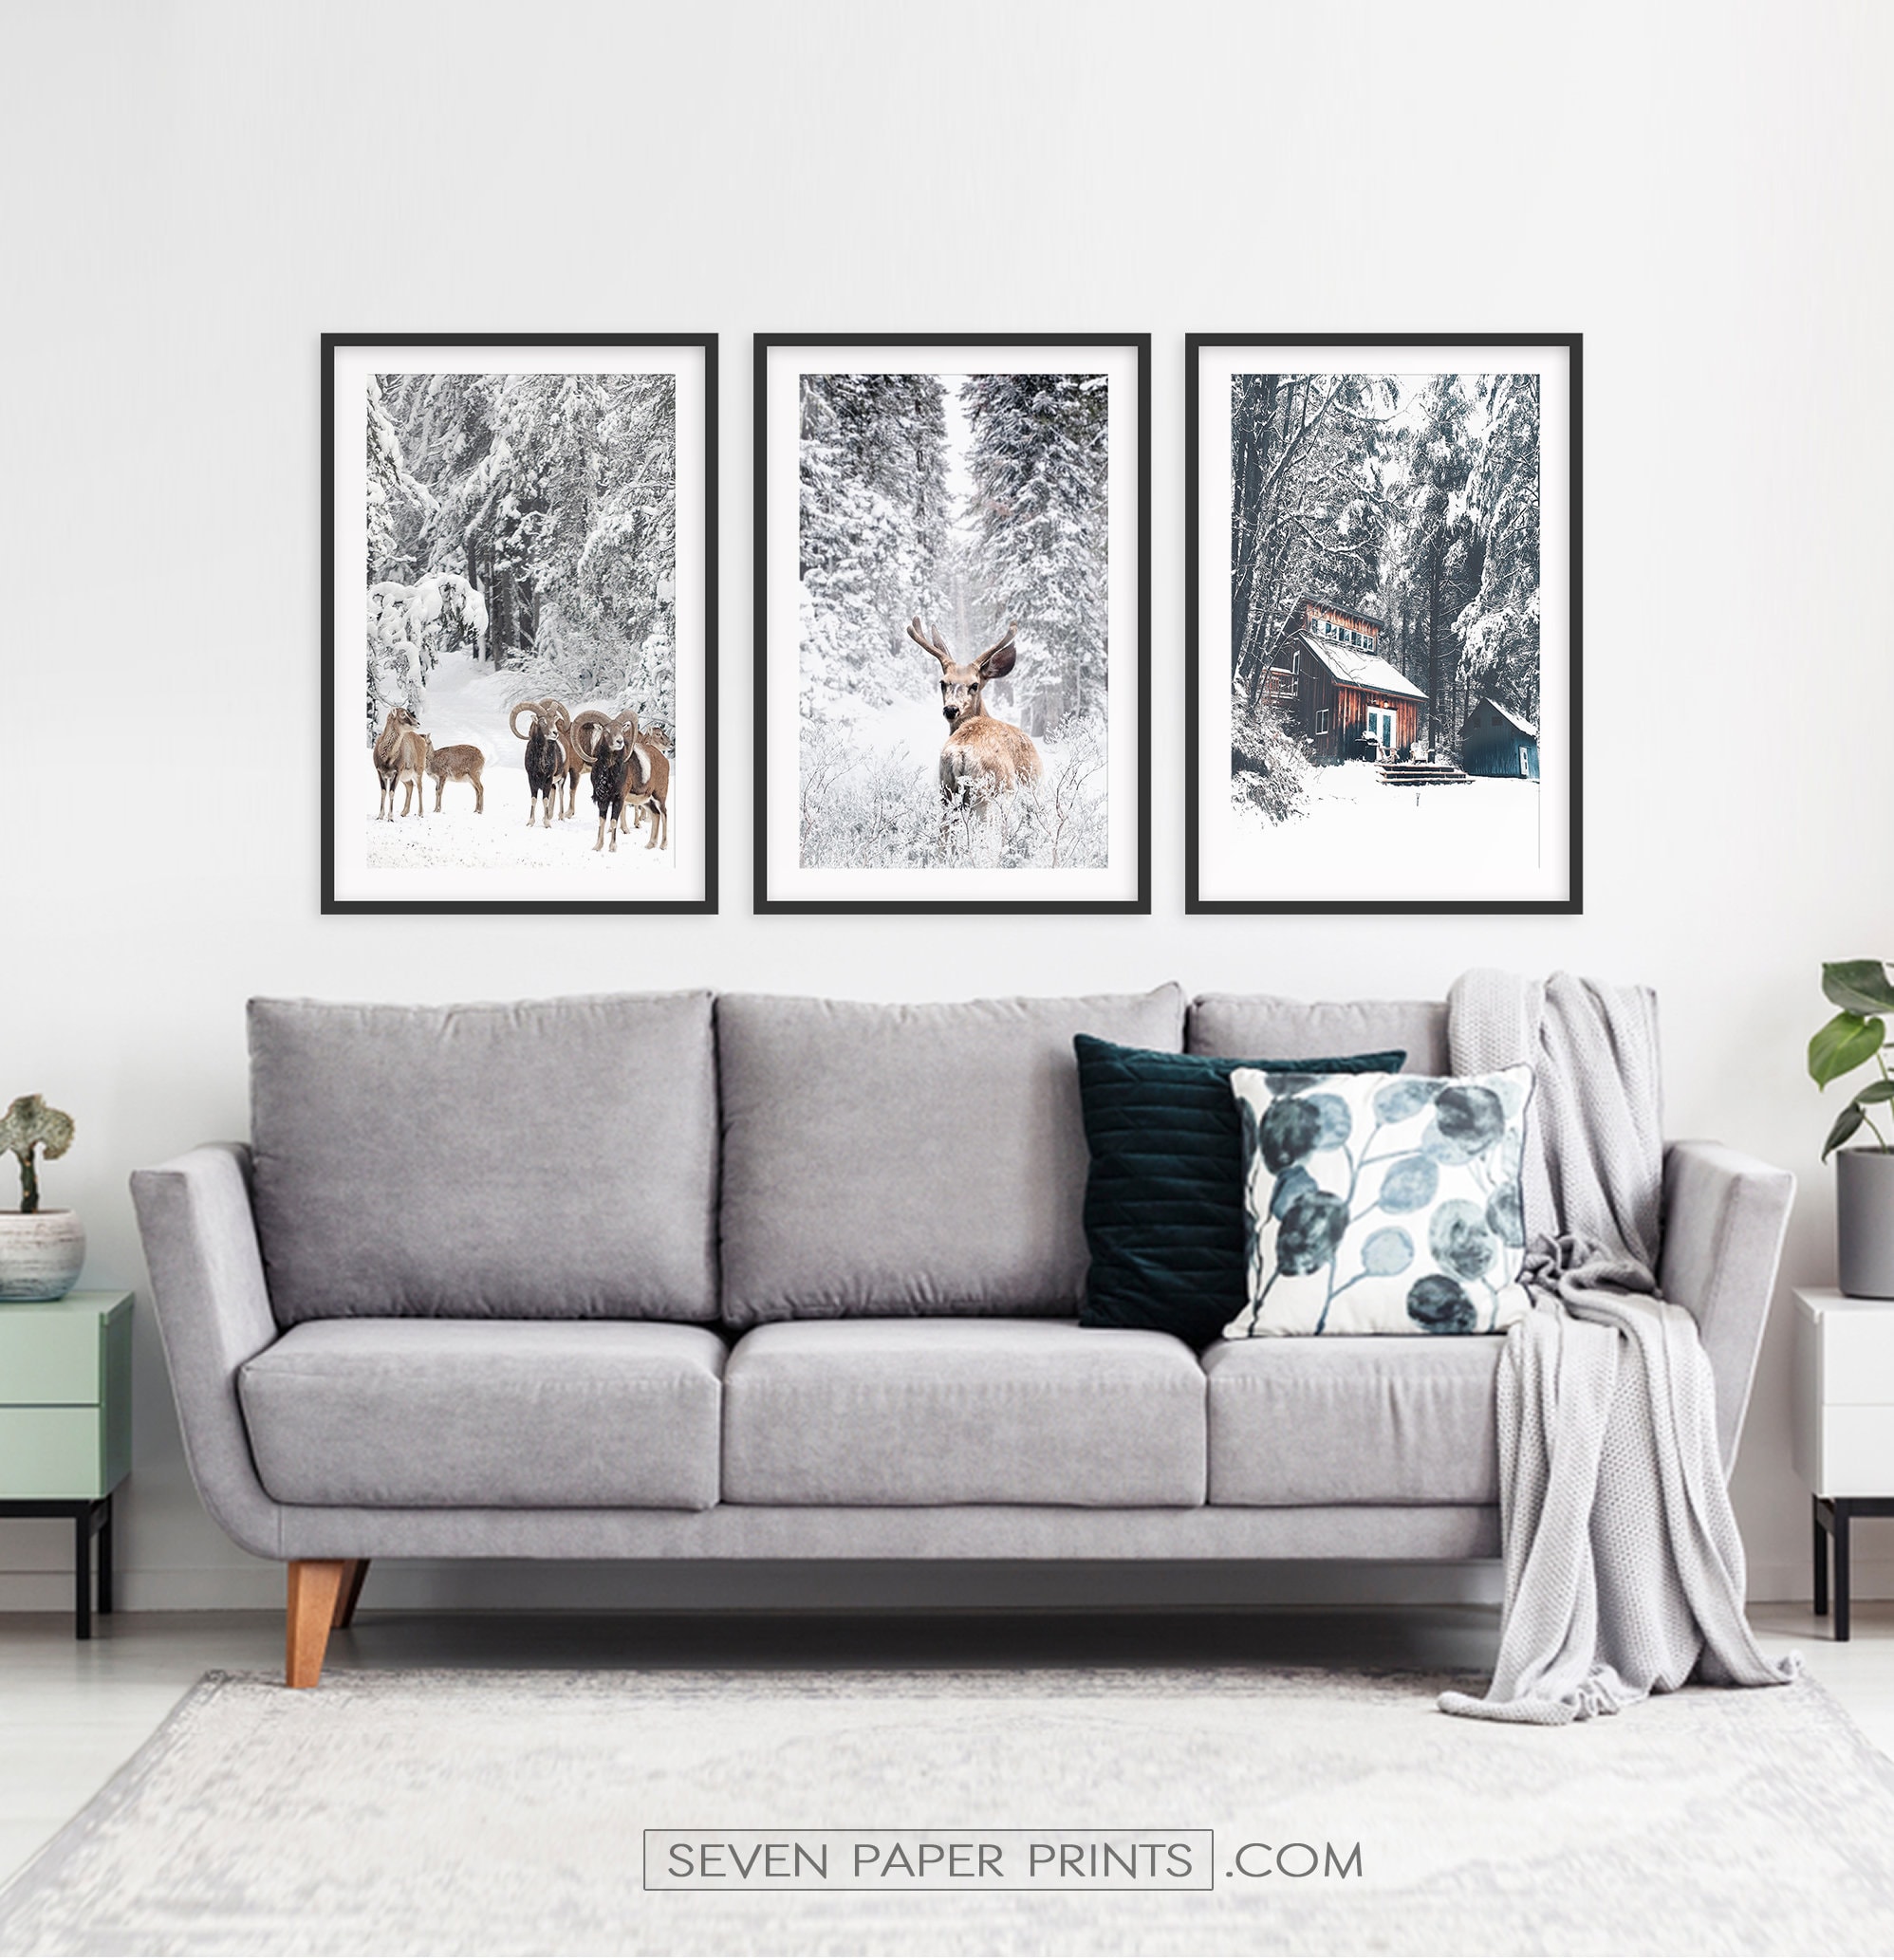 Christmas in Forest Framed Set Of 3, Snowy Landscape With Rams, Deer & Old Barn, Winter Prints Wild Animals For Dcor